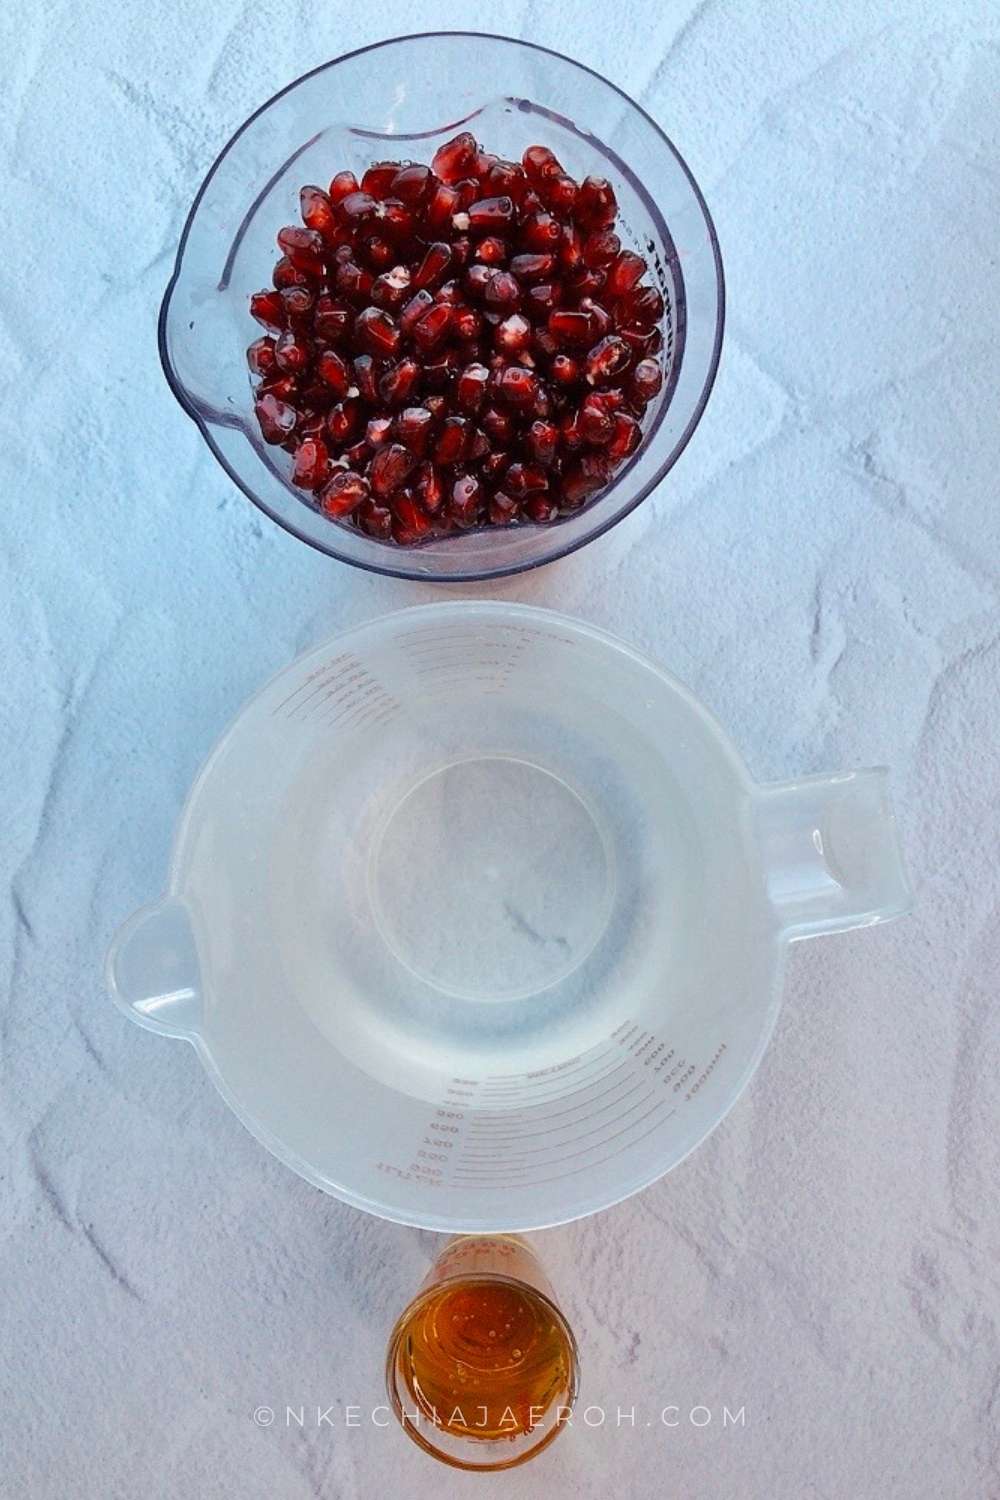 The ingredients for making this pomegranate juice include – pomegranate seeds, water, and honey (optional). Keep reading or scroll for the pomegranate juice recipe instructions. 